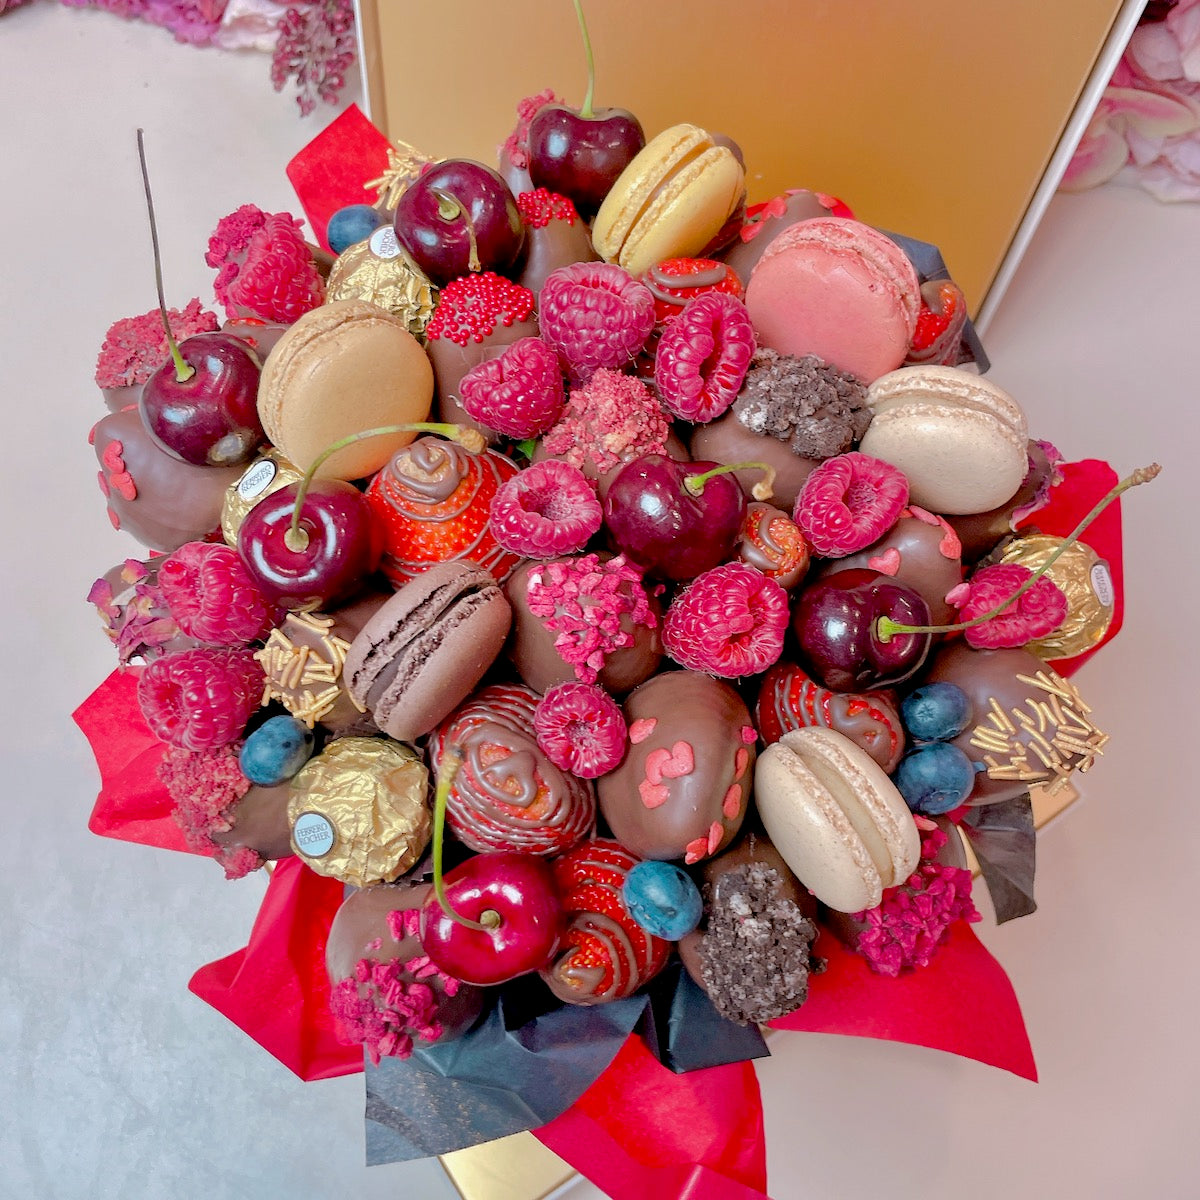 How to Make A Chocolate Covered Strawberry Bouquet